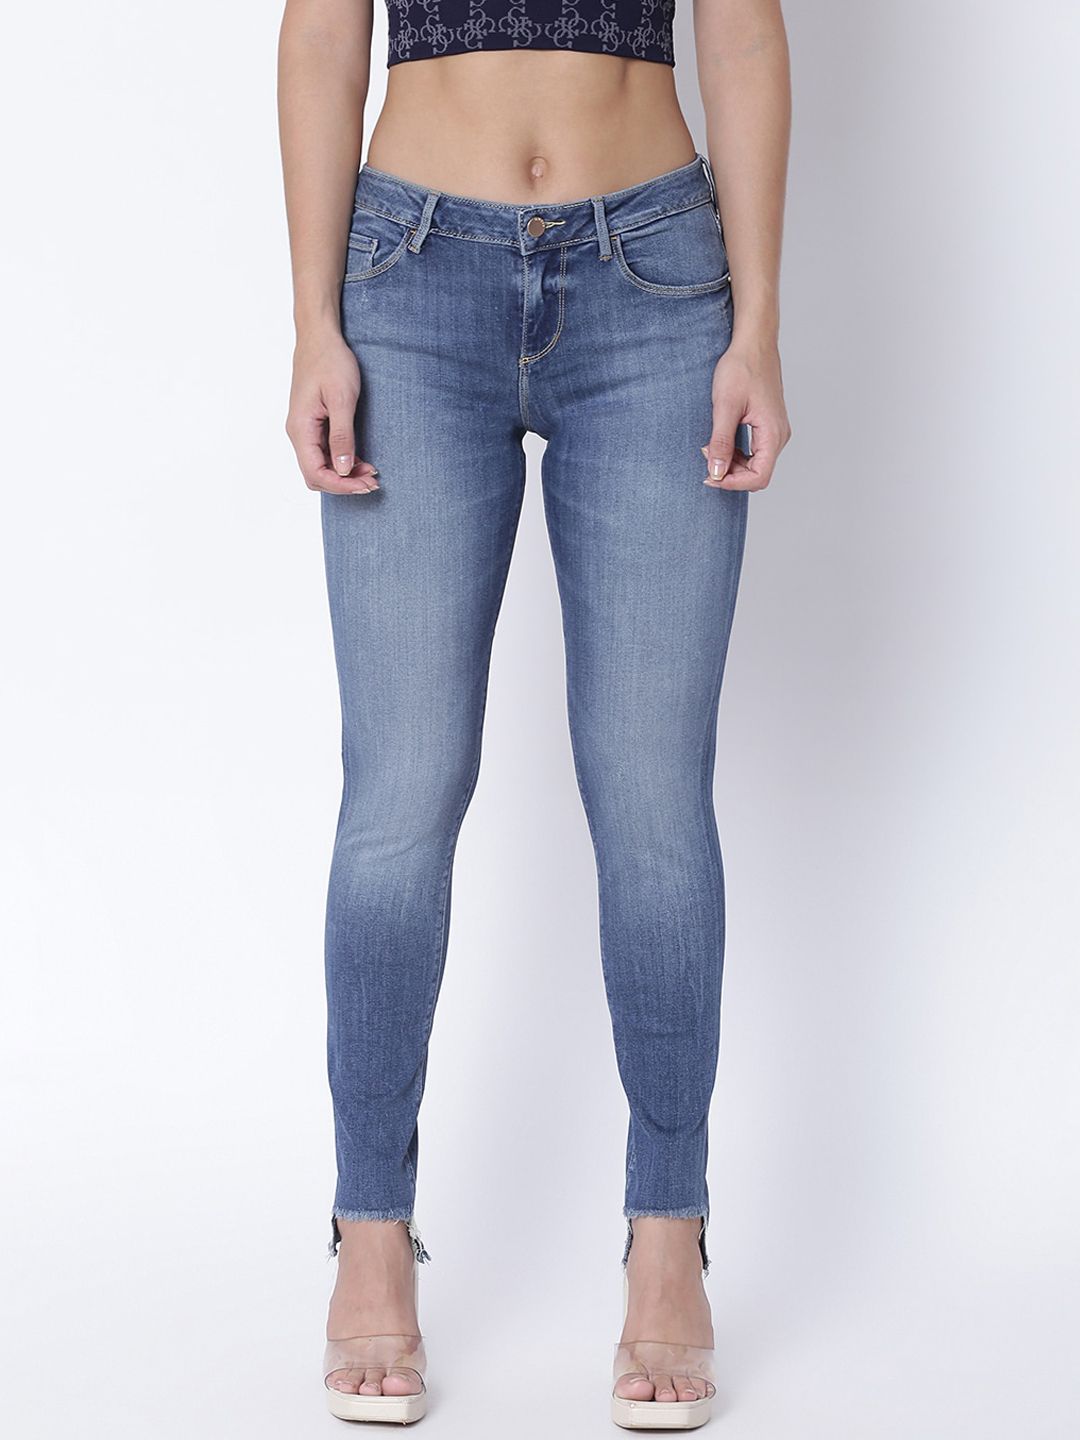 GUESS Women Assorted Low Distress Heavy Fade Jeans Price in India